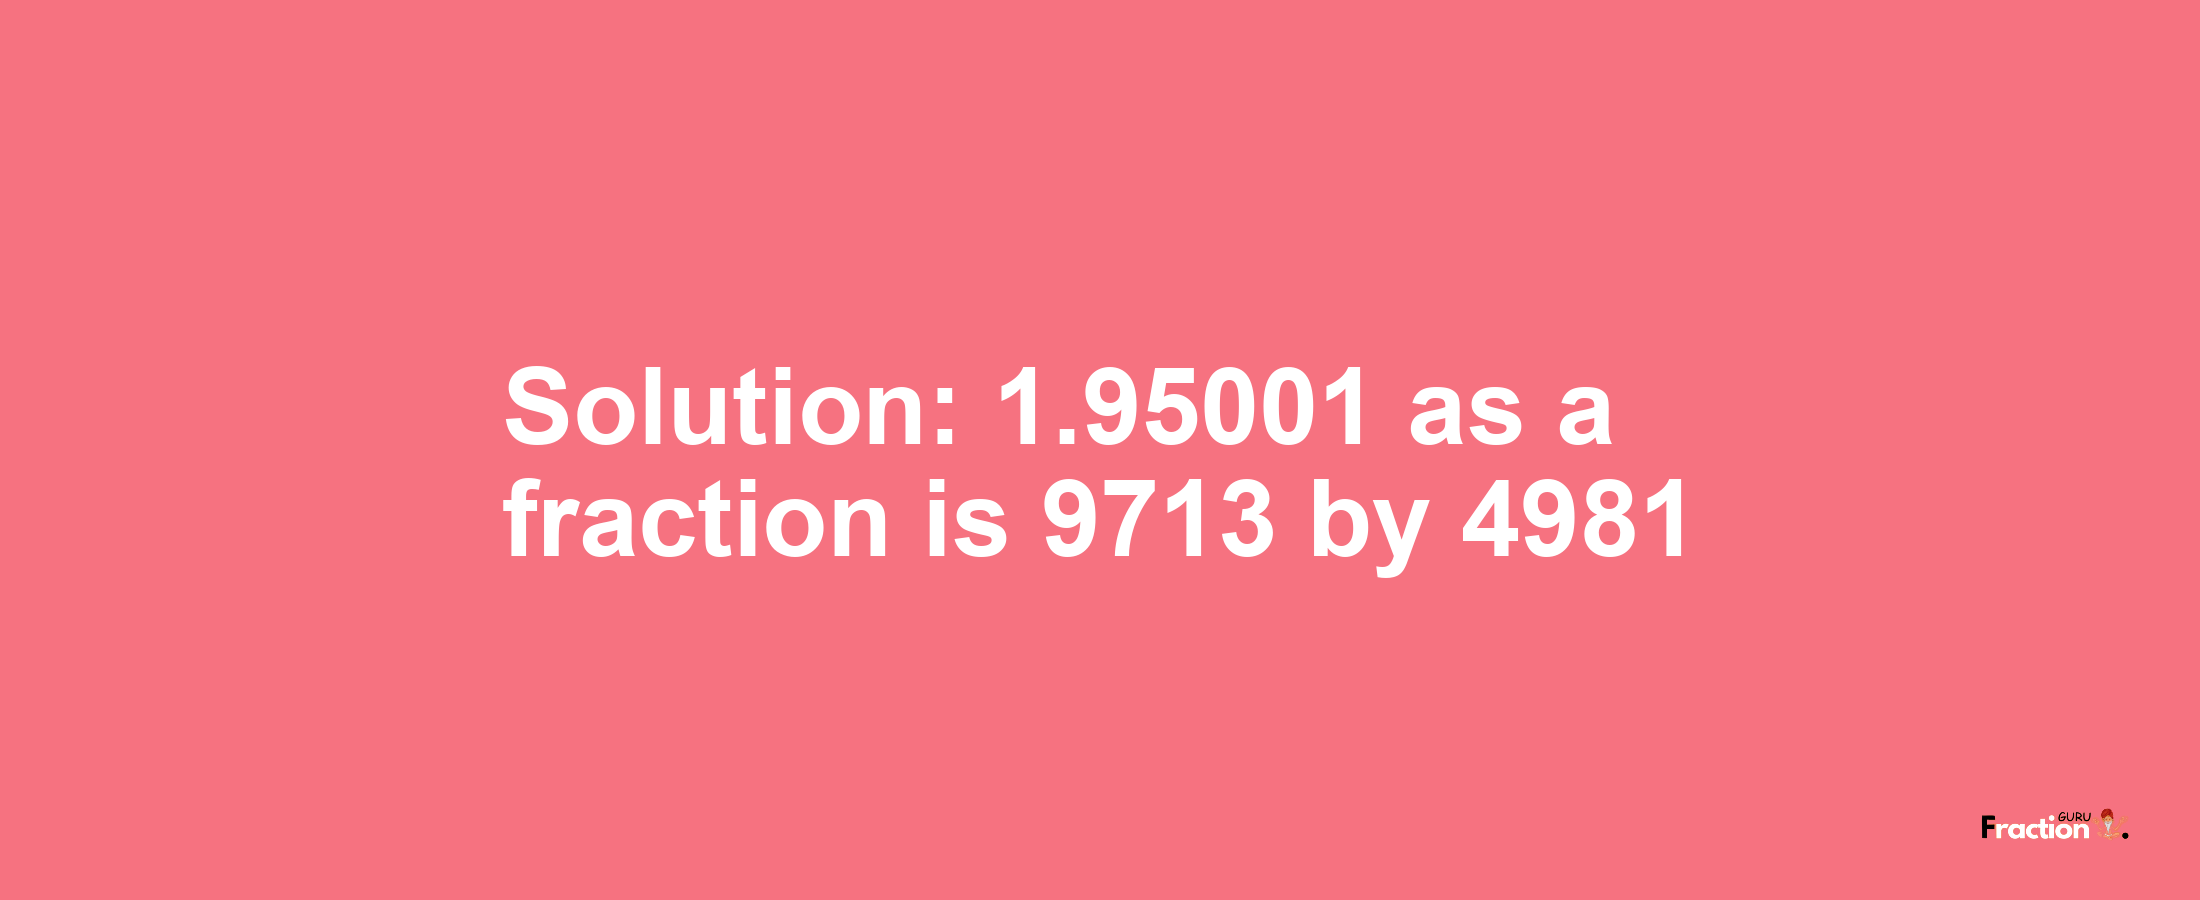 Solution:1.95001 as a fraction is 9713/4981